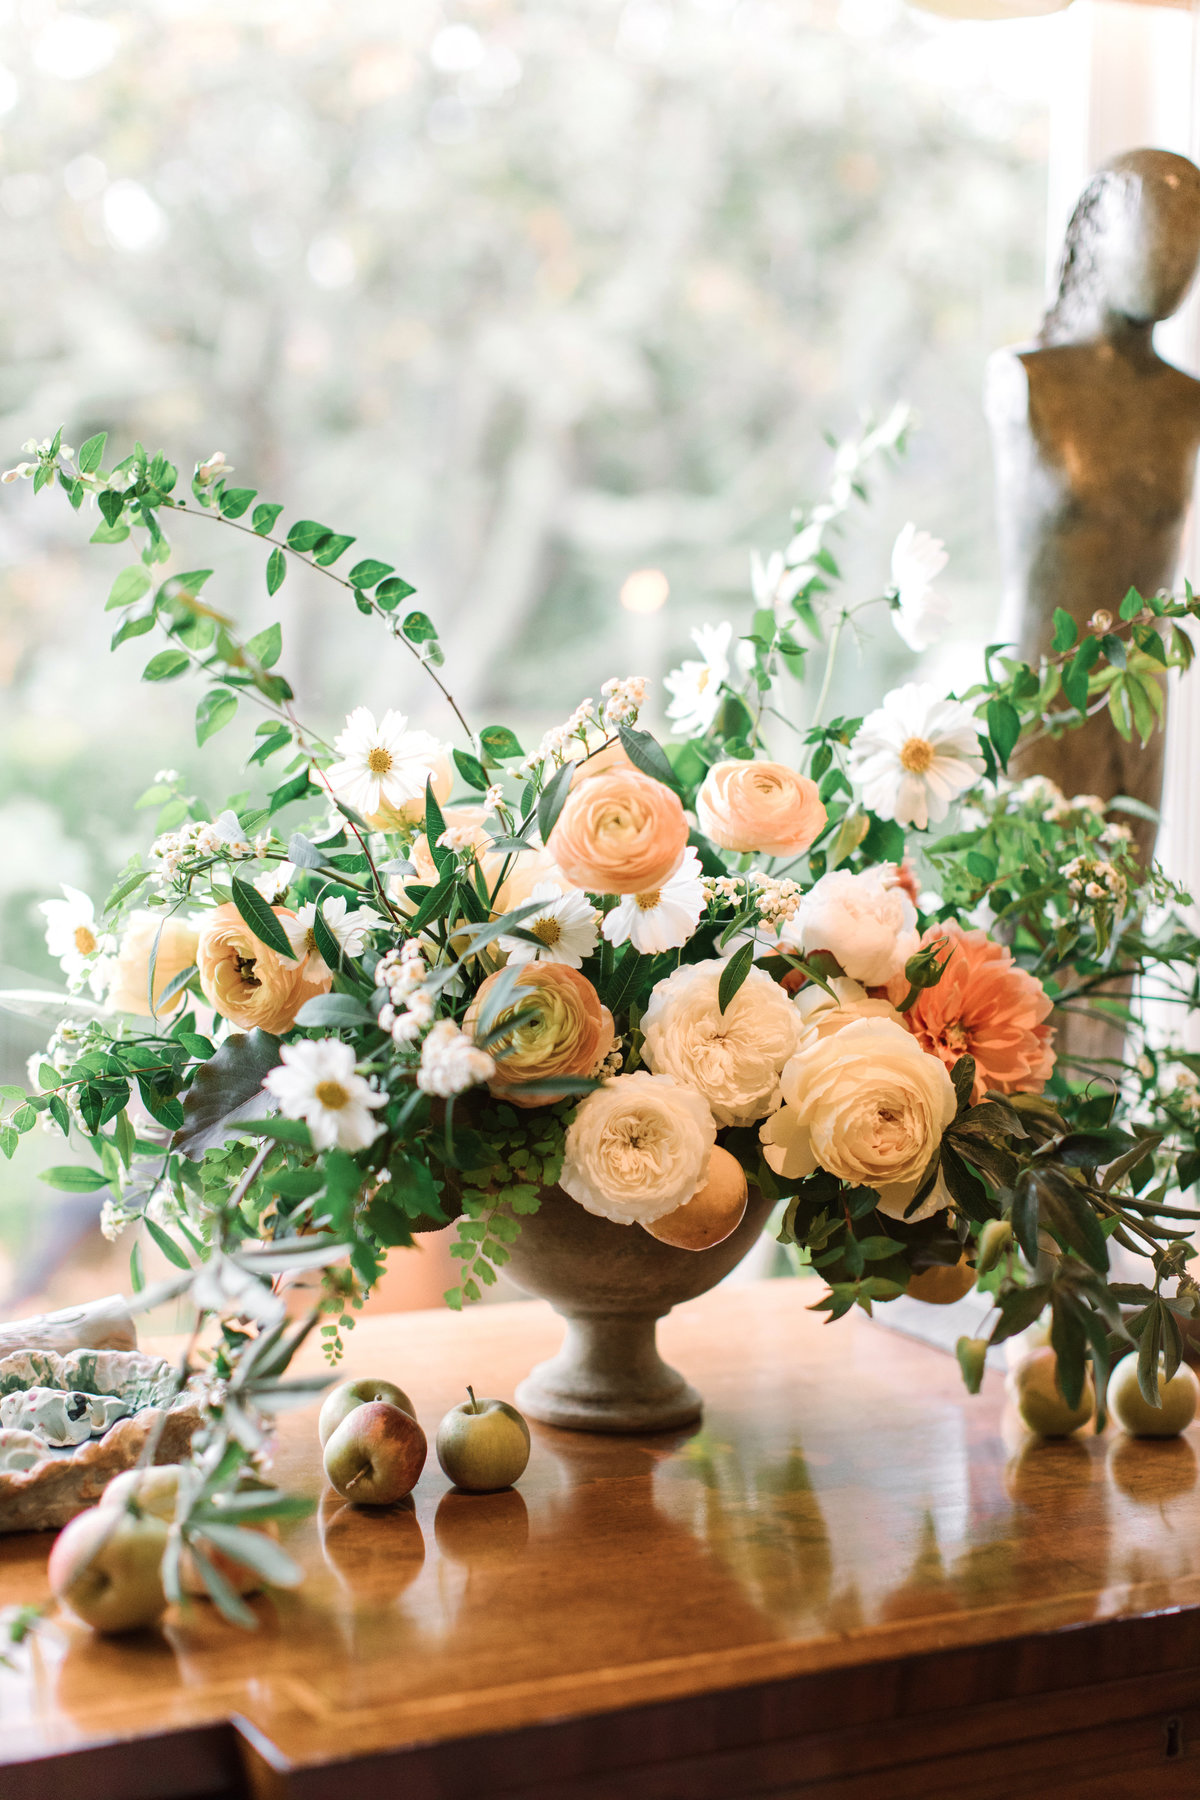 Flowers for wedding by Jenny Schneider Events at a private residence in Marin County, California.